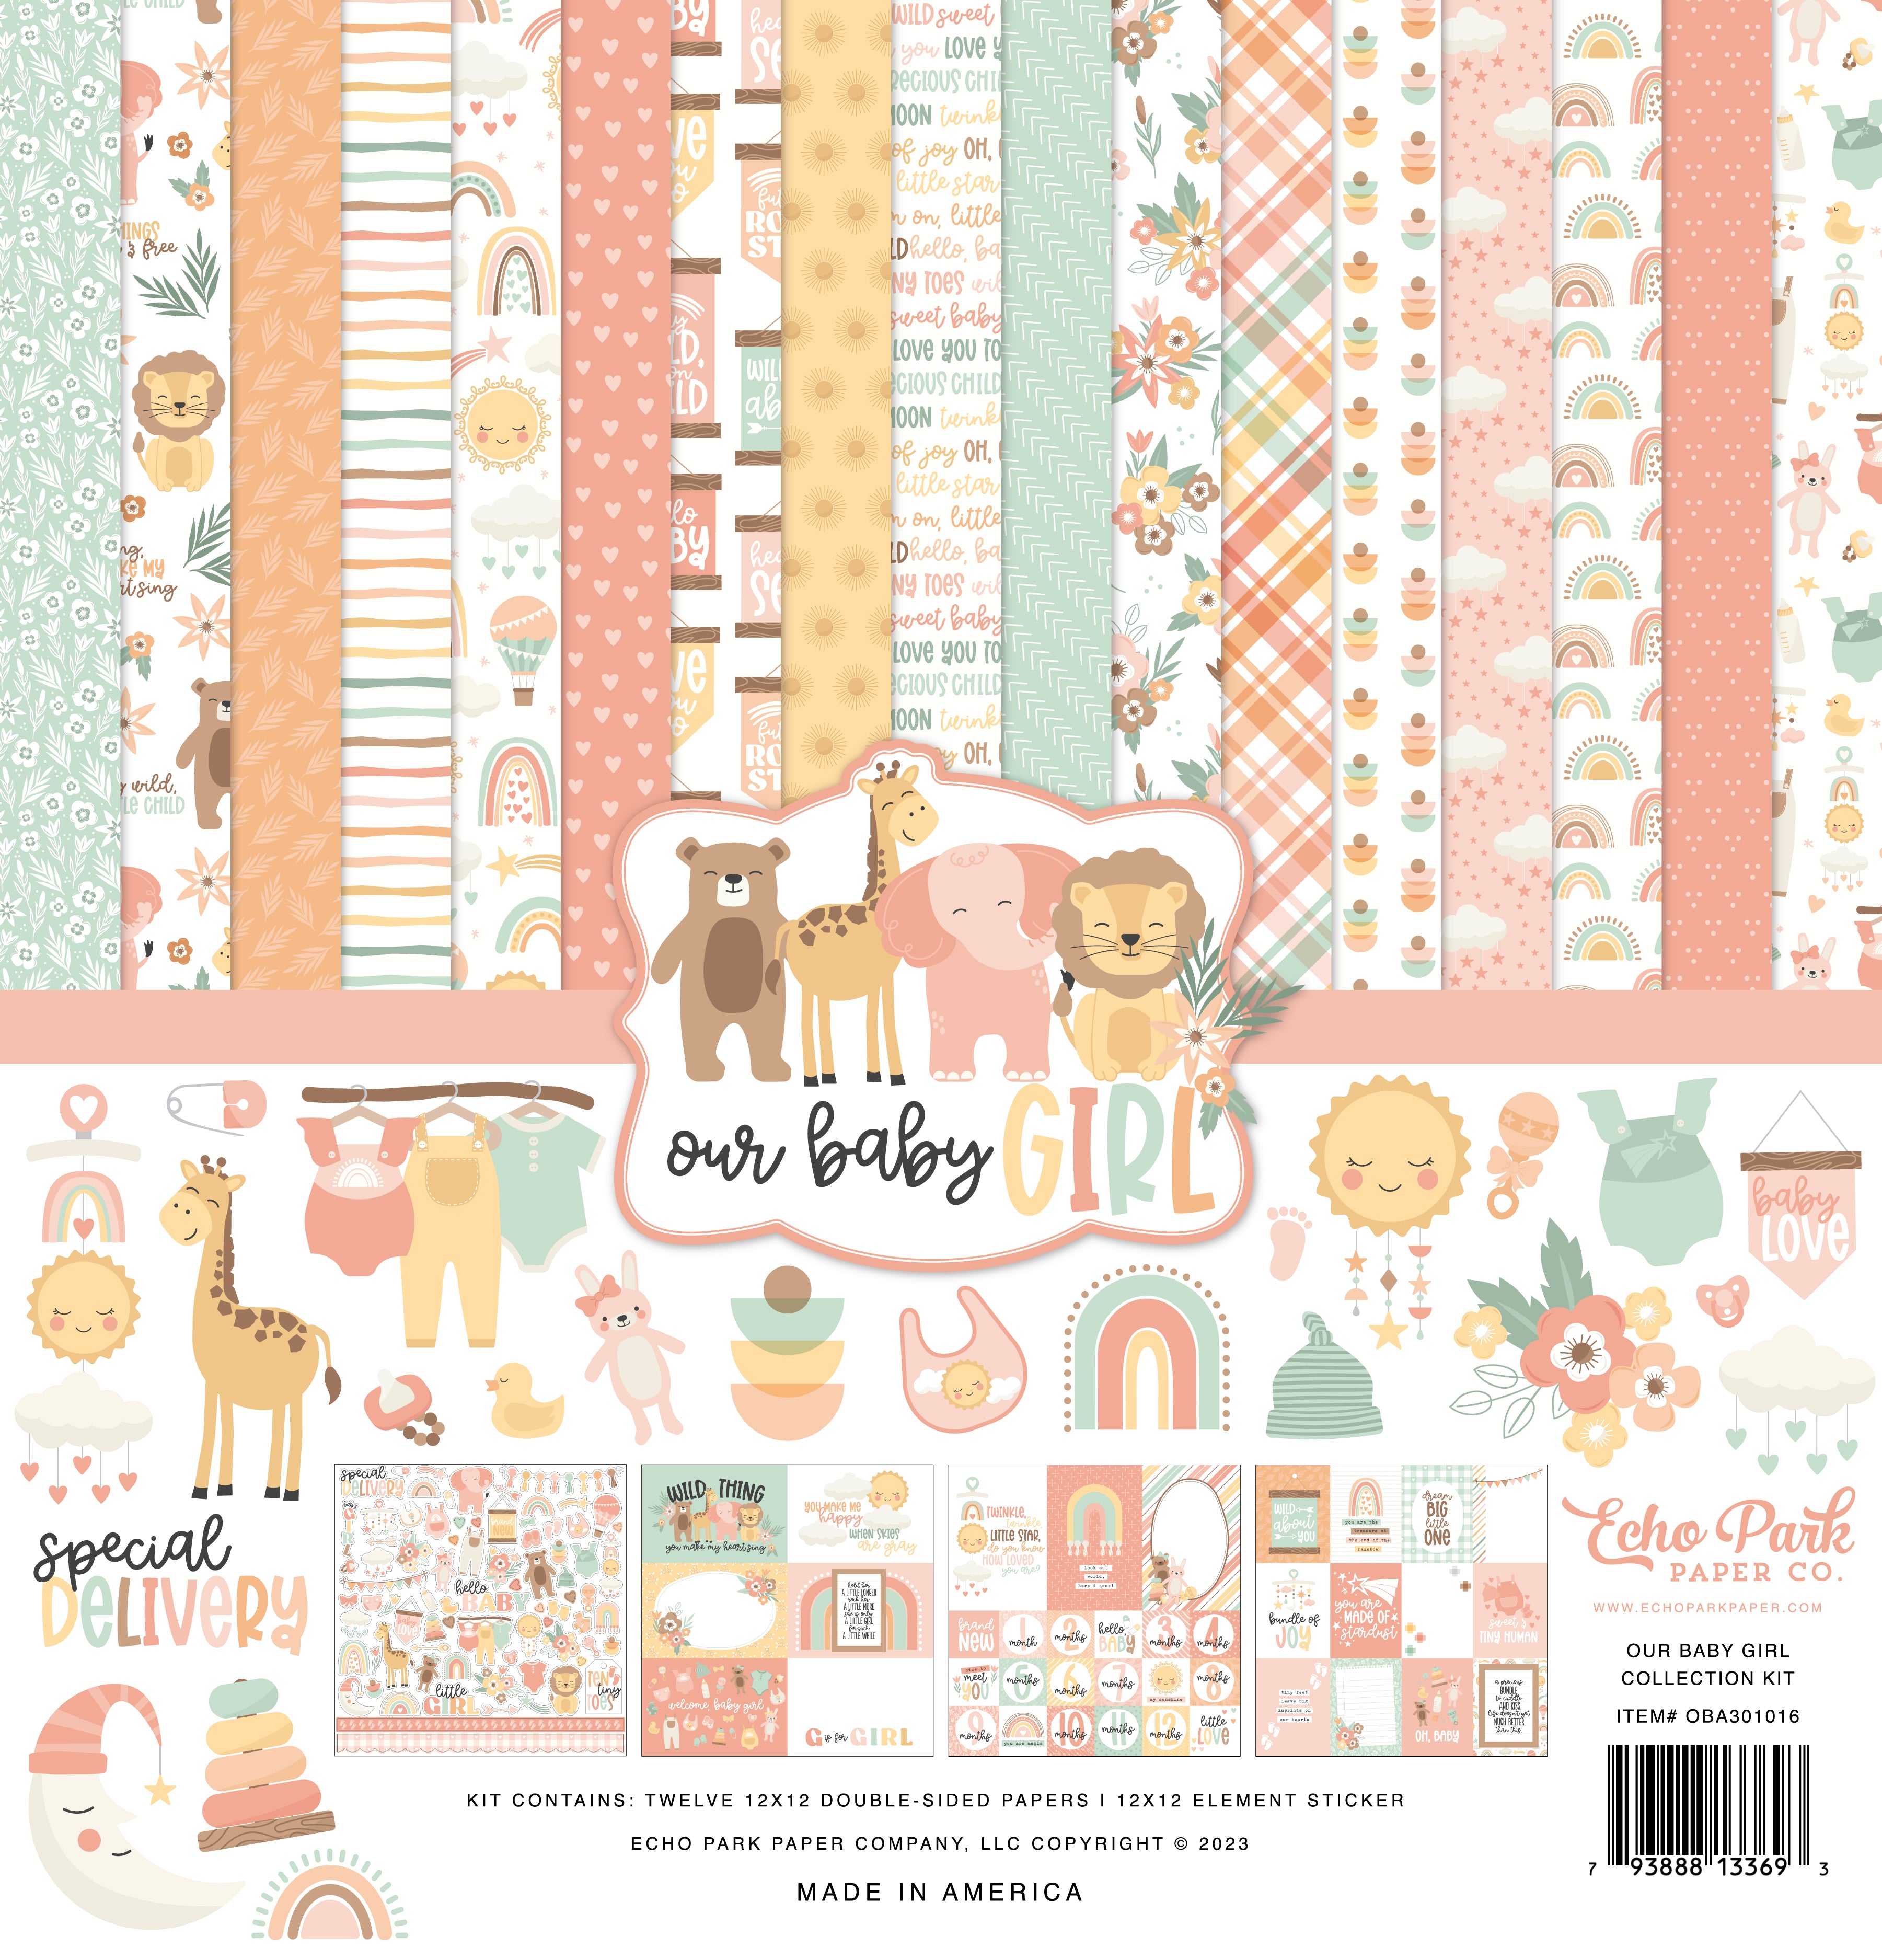 Our Baby Girl Collection 12 x 12 Scrapbook Collection Kit by Echo Park Paper